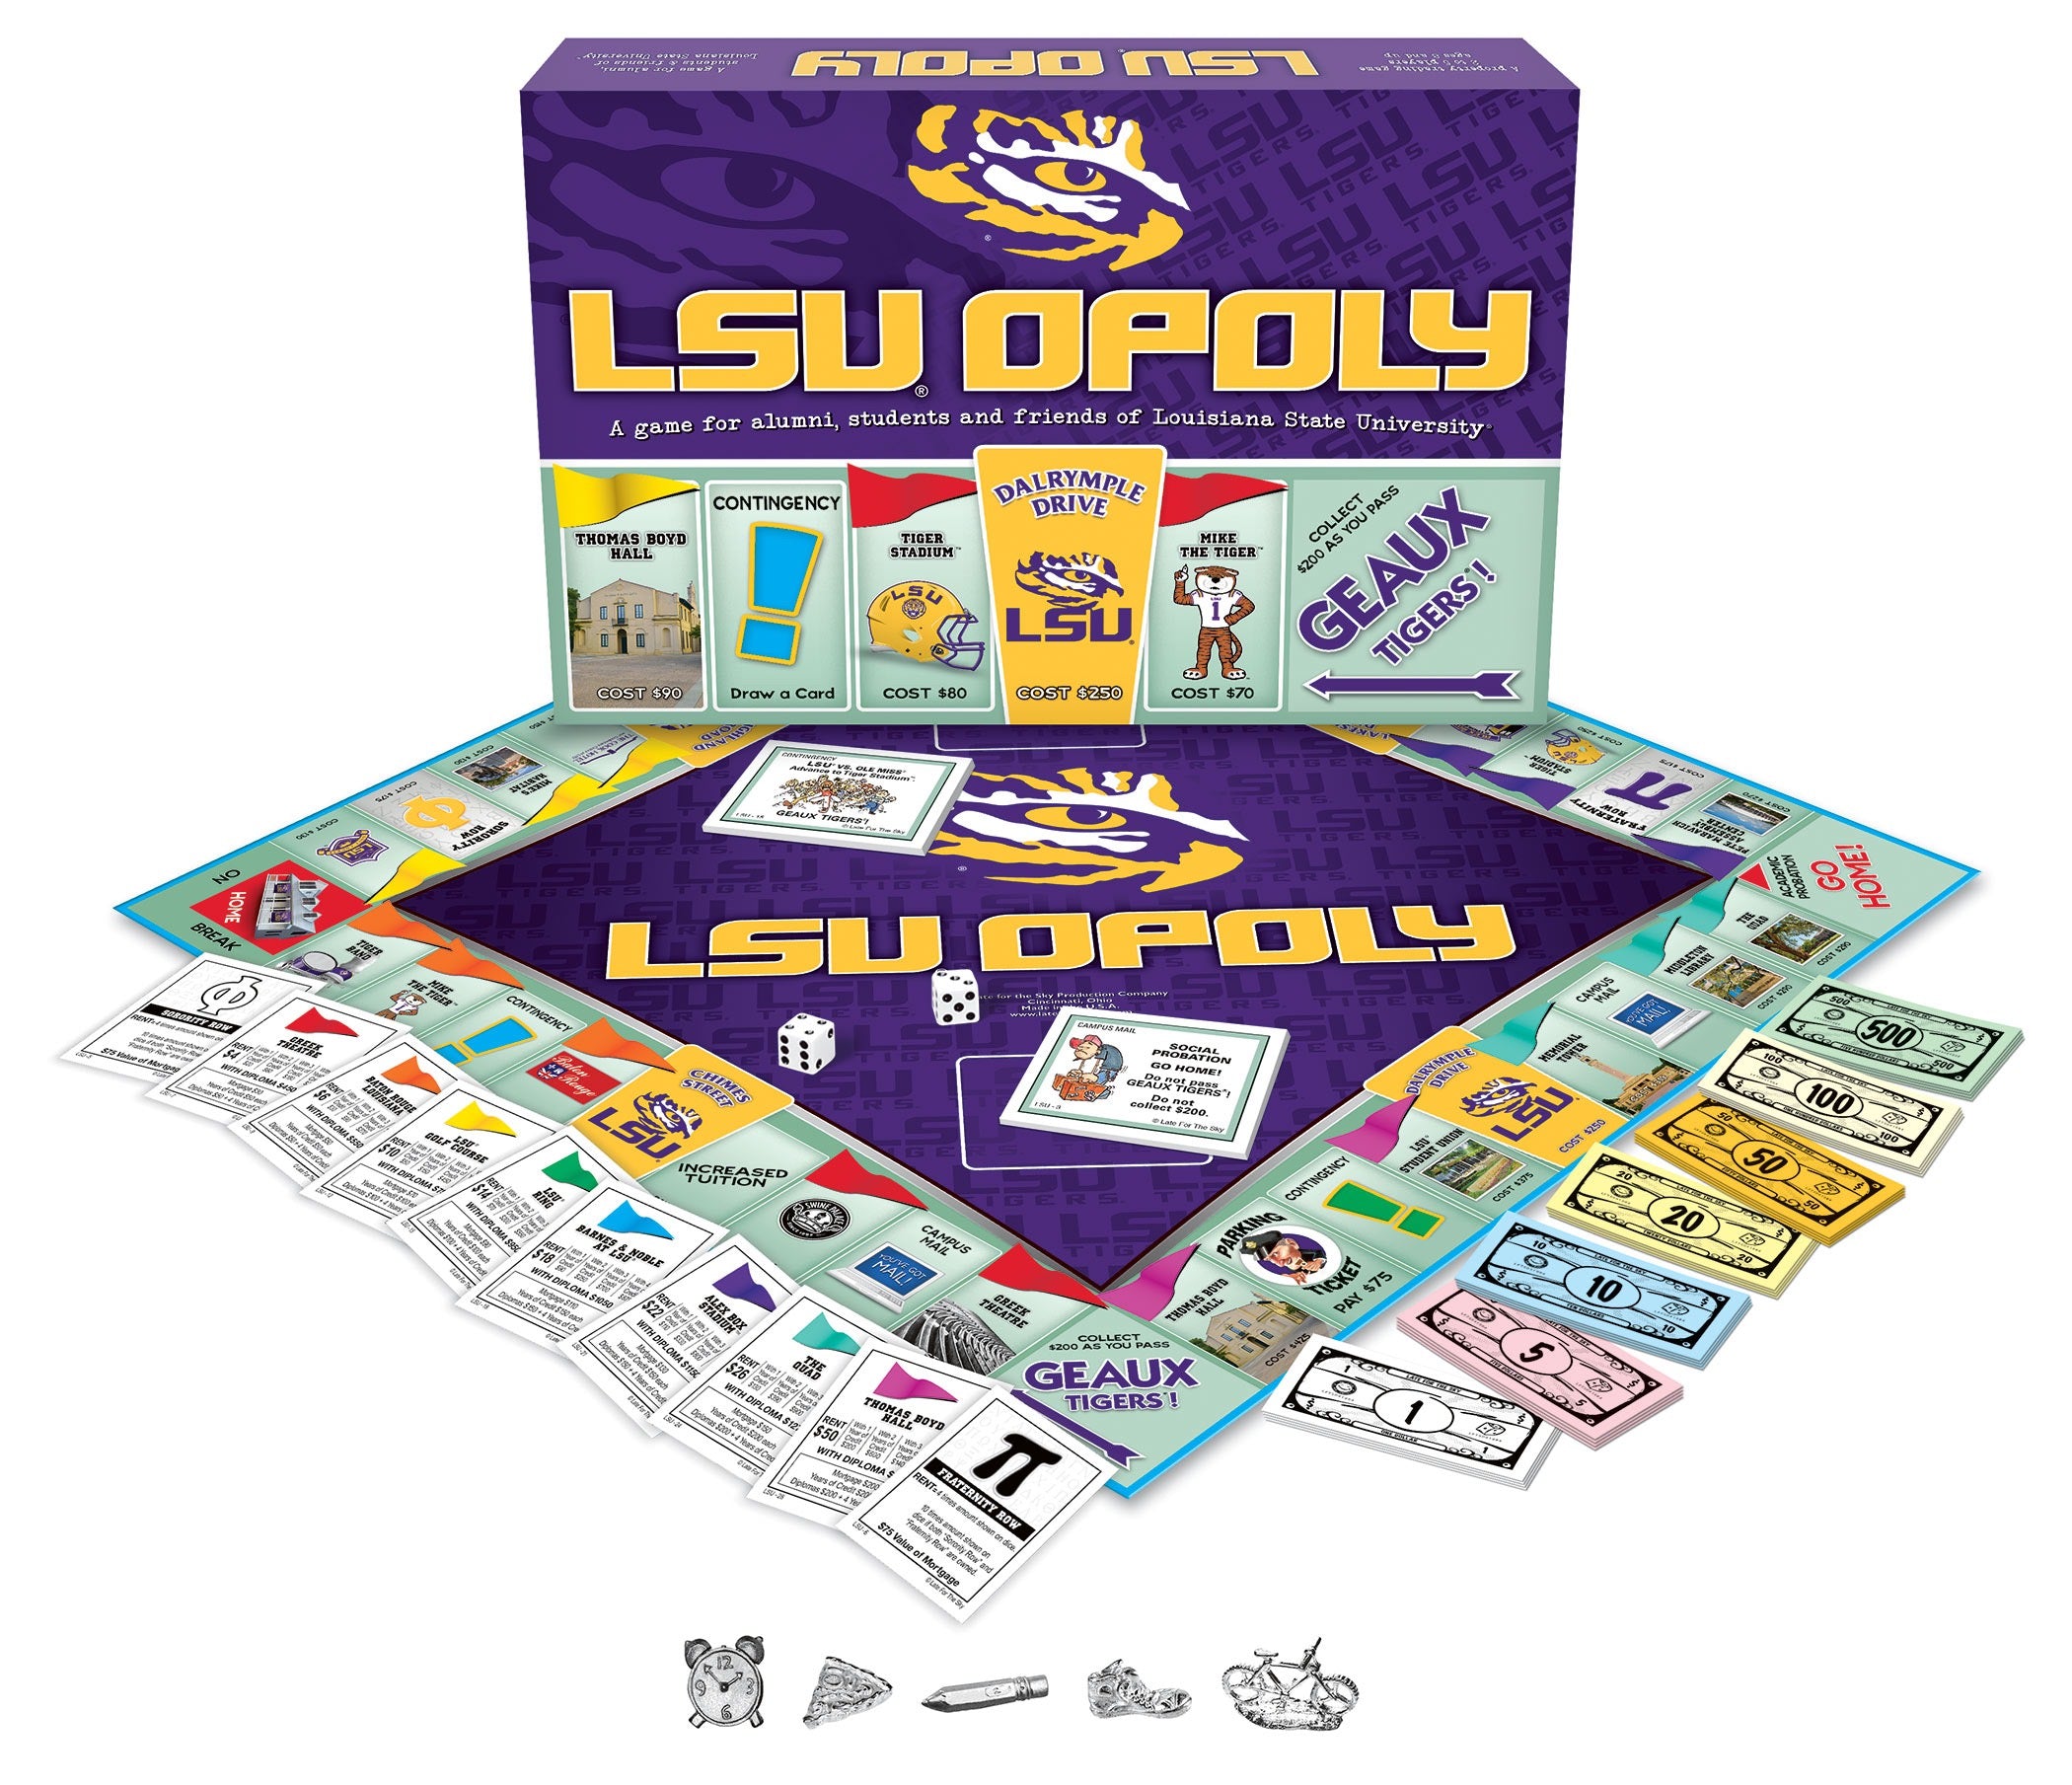 Officially Licensed NCAA 23 Felt Wall Banner - LSU Tigers